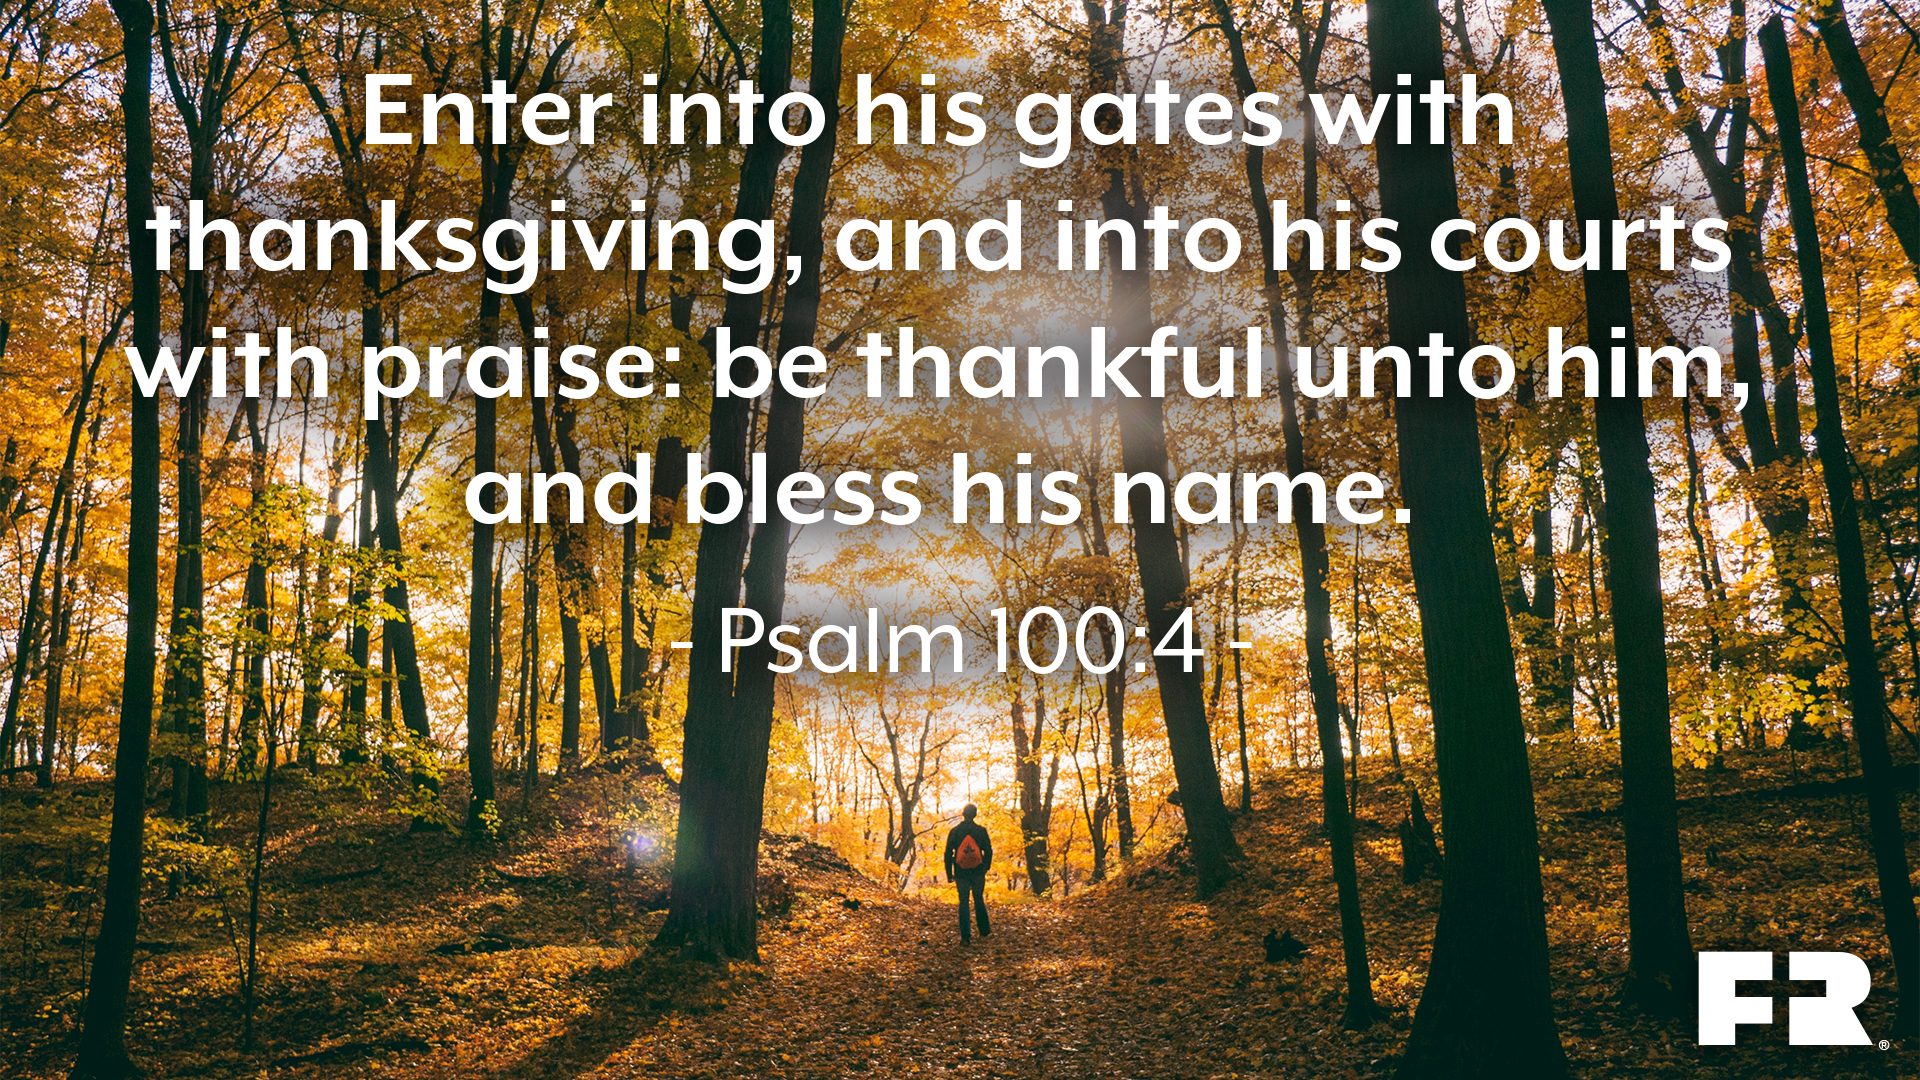 "Enter into his gates with thanksgiving, and into his courts with praise: be thankful unto him, and bless his name."